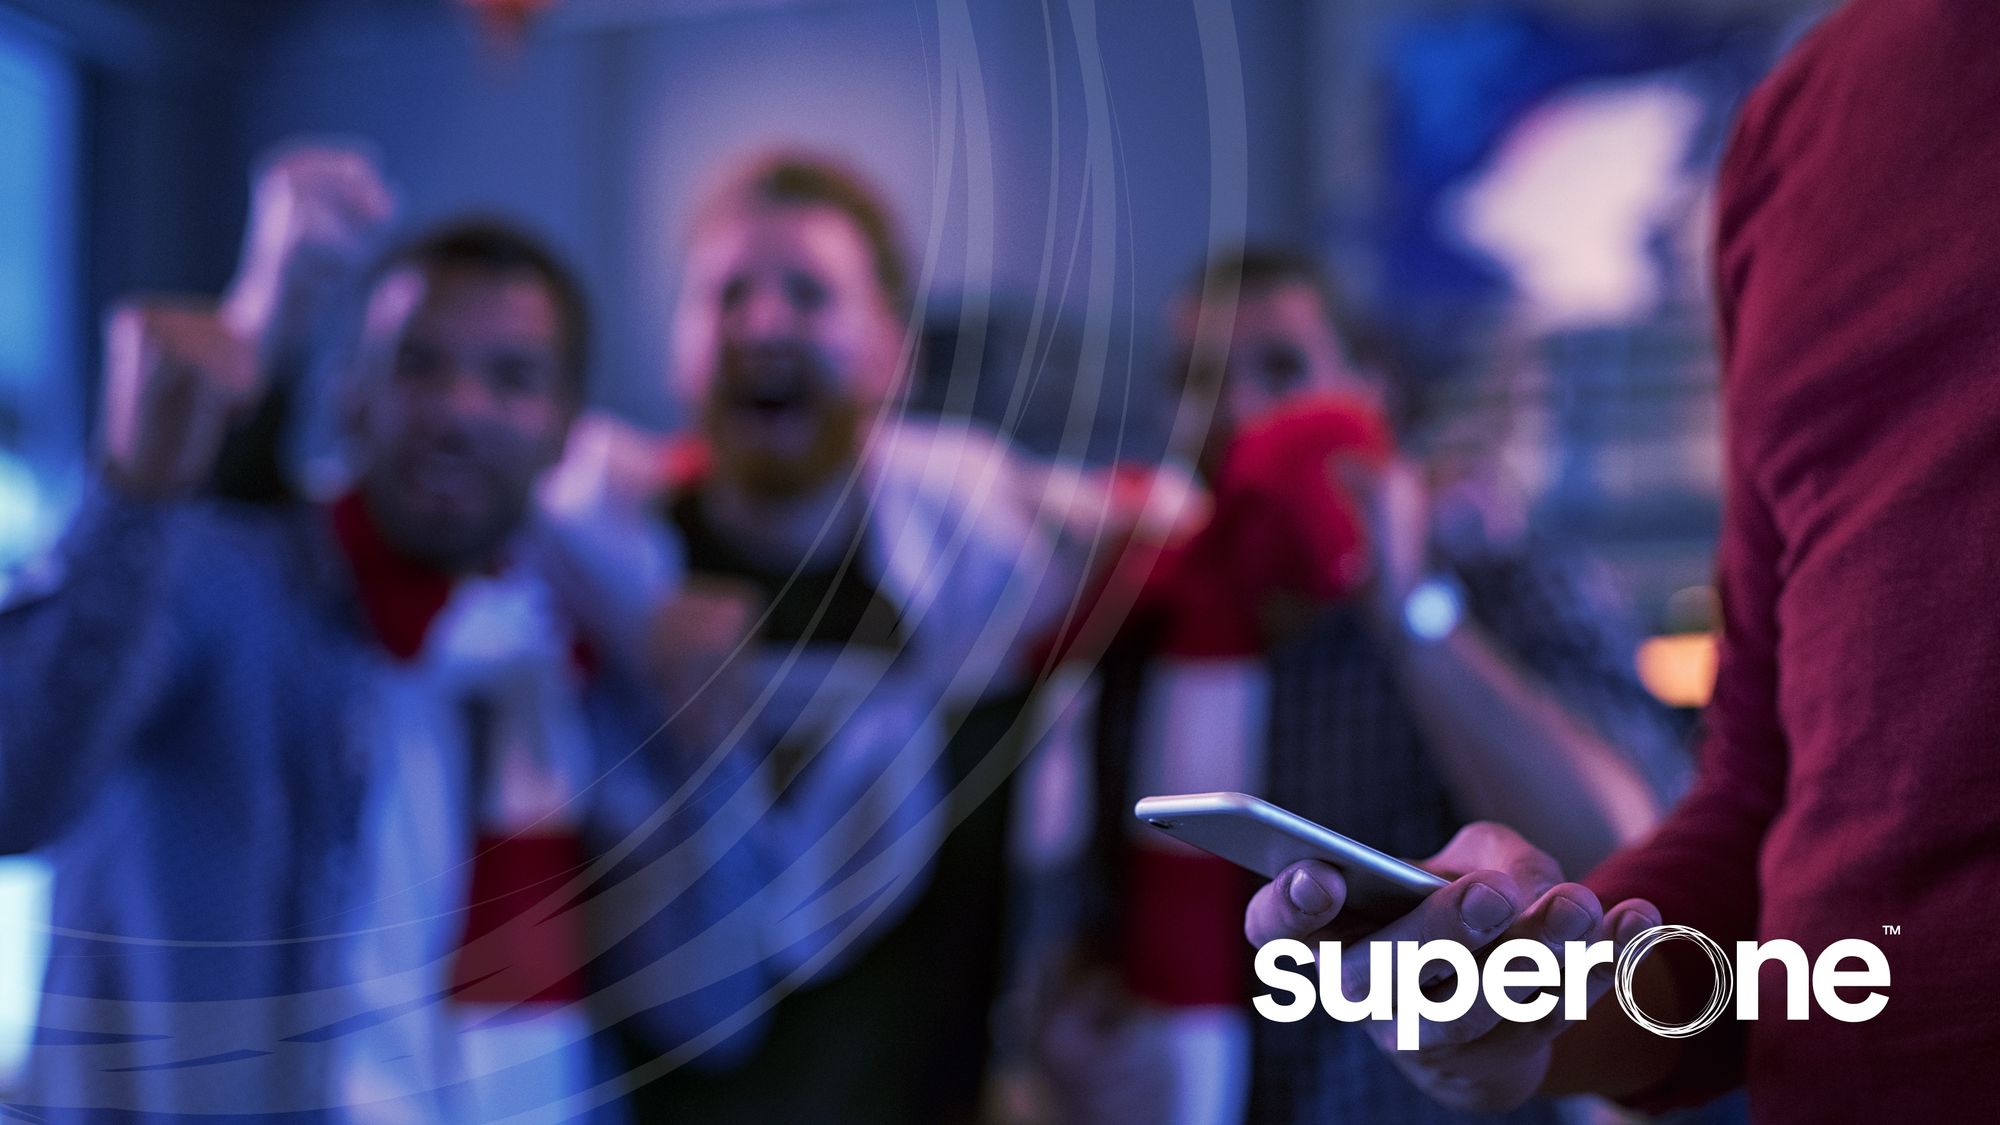 SuperOne’s organizational structure: Rewarding the people who grow
the network